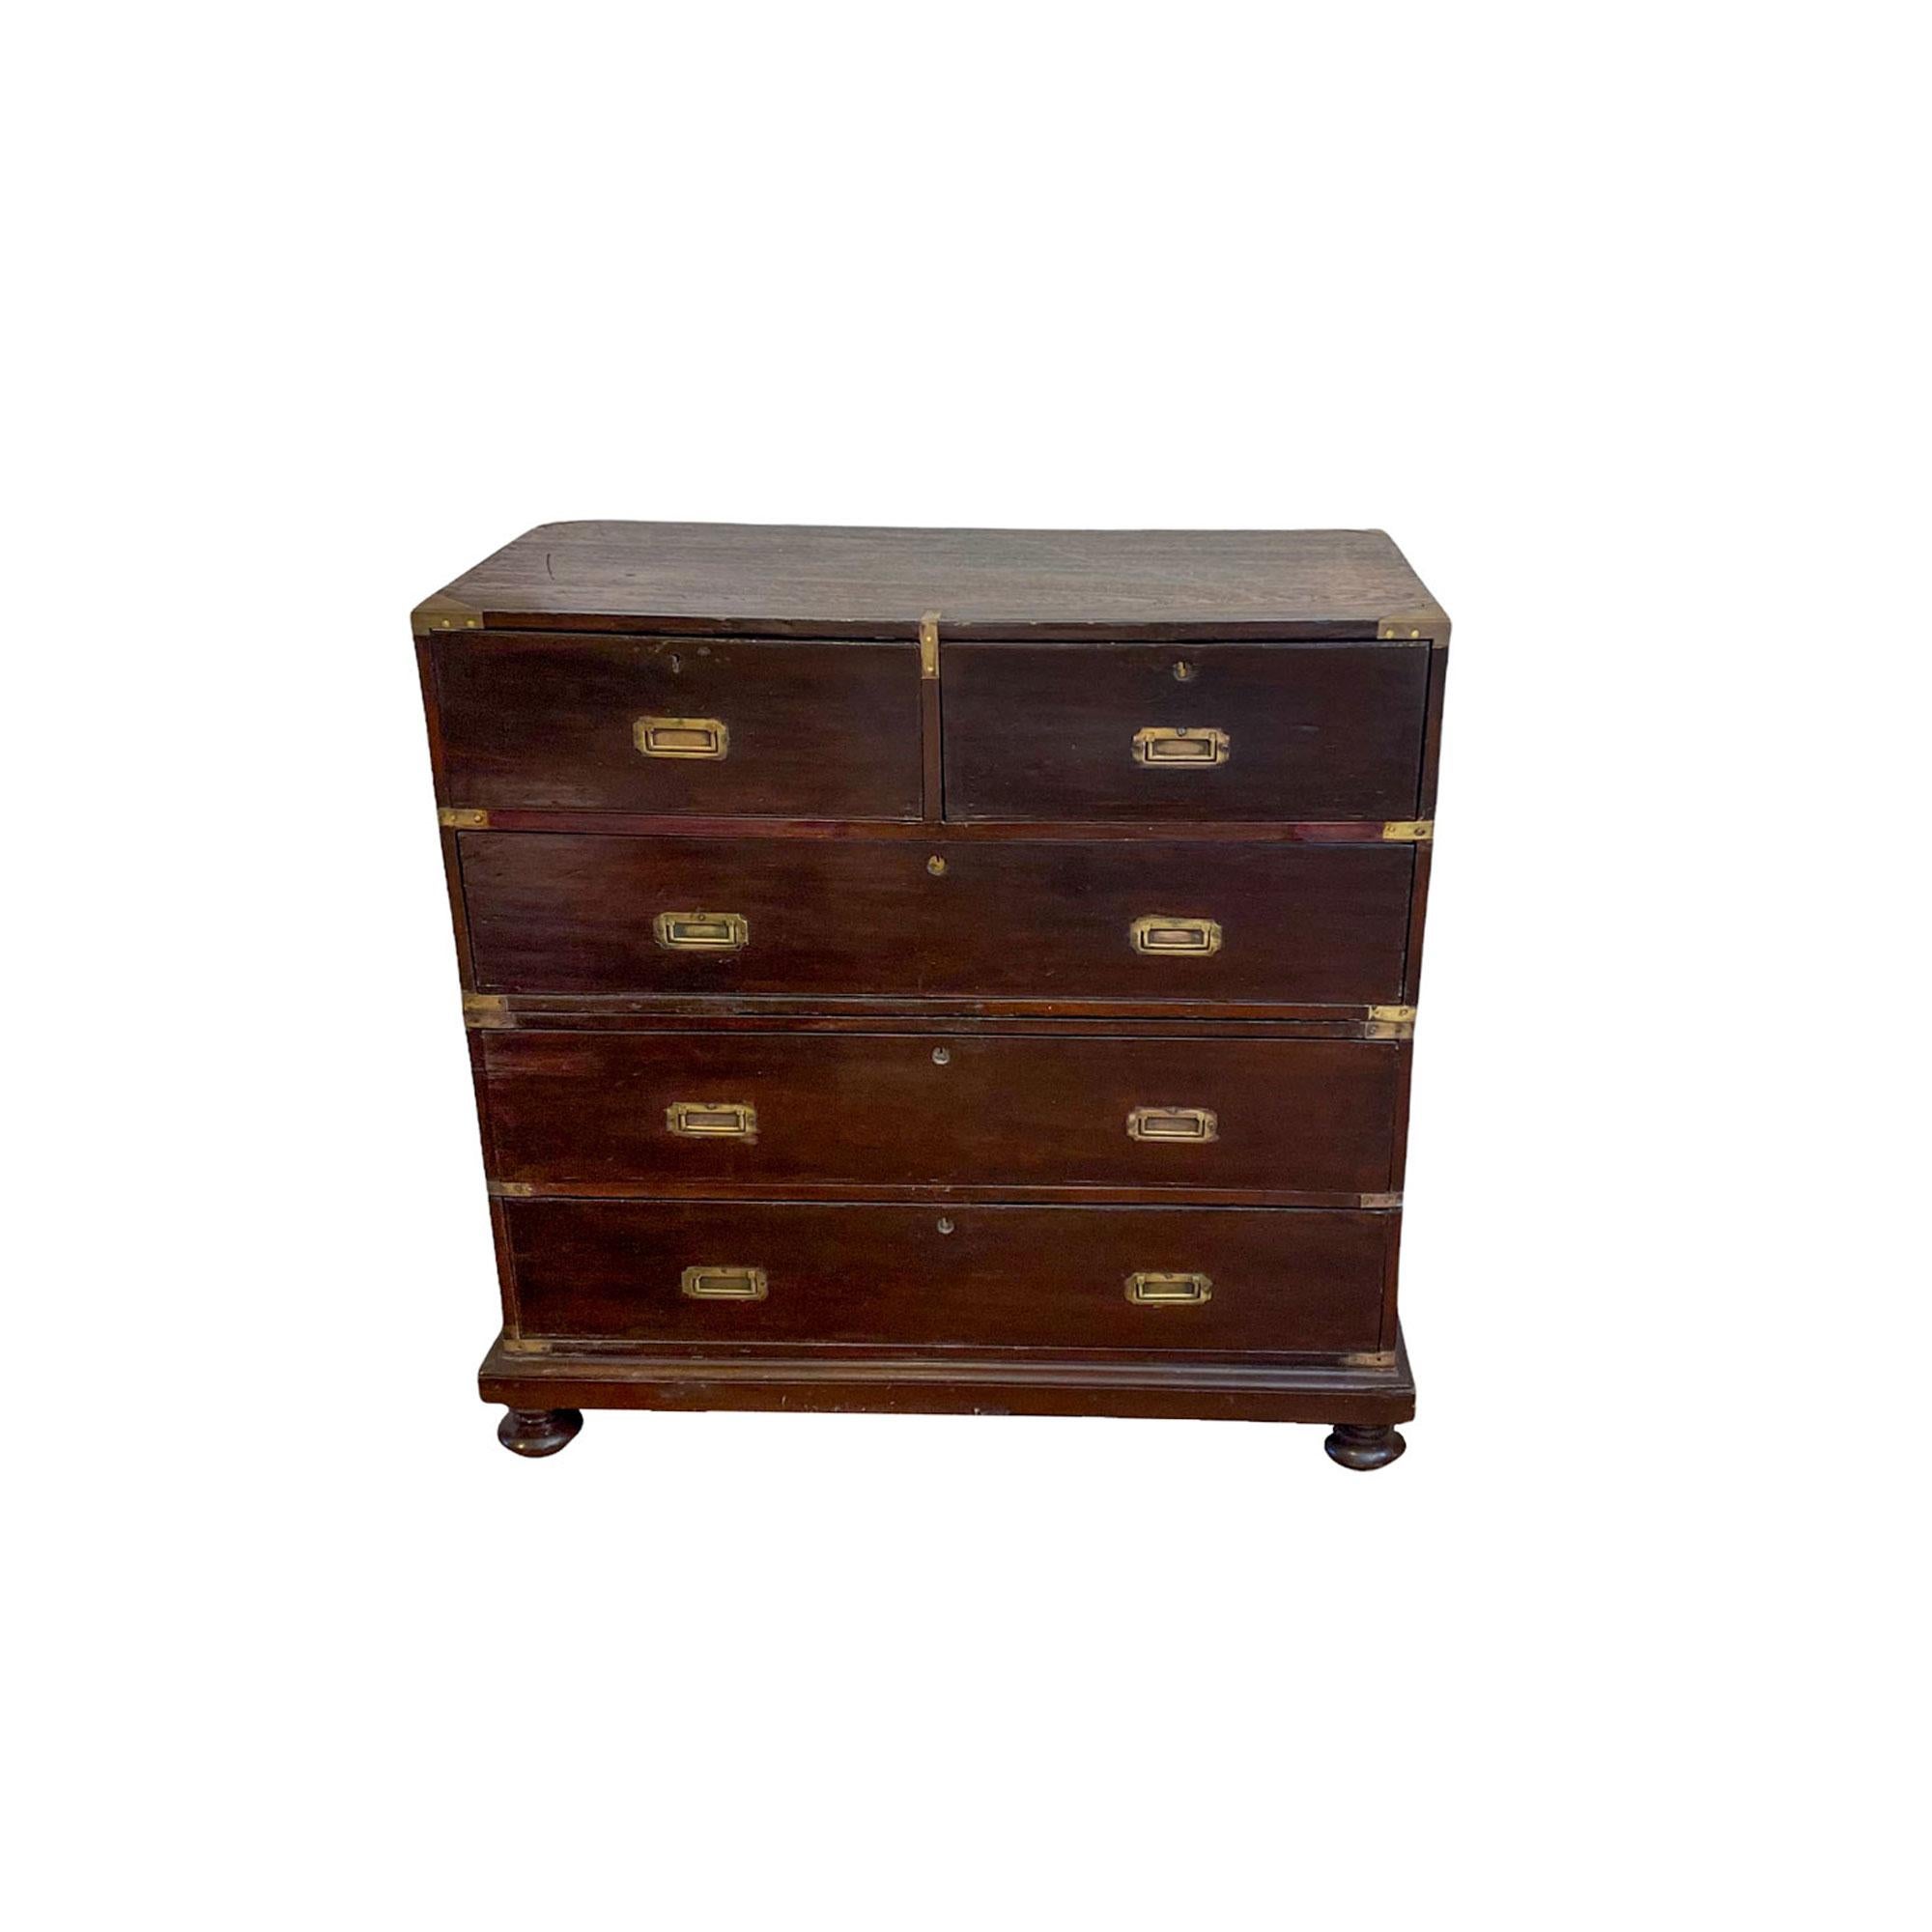 Mid 19th century two part campaign chest of drawers with recessed brass drawer pulls, lift handles and reinforcing hardware. The case in 2 parts with exposed dovetails to the top and with 2 short drawers above 3 long drawers with the lower half on a